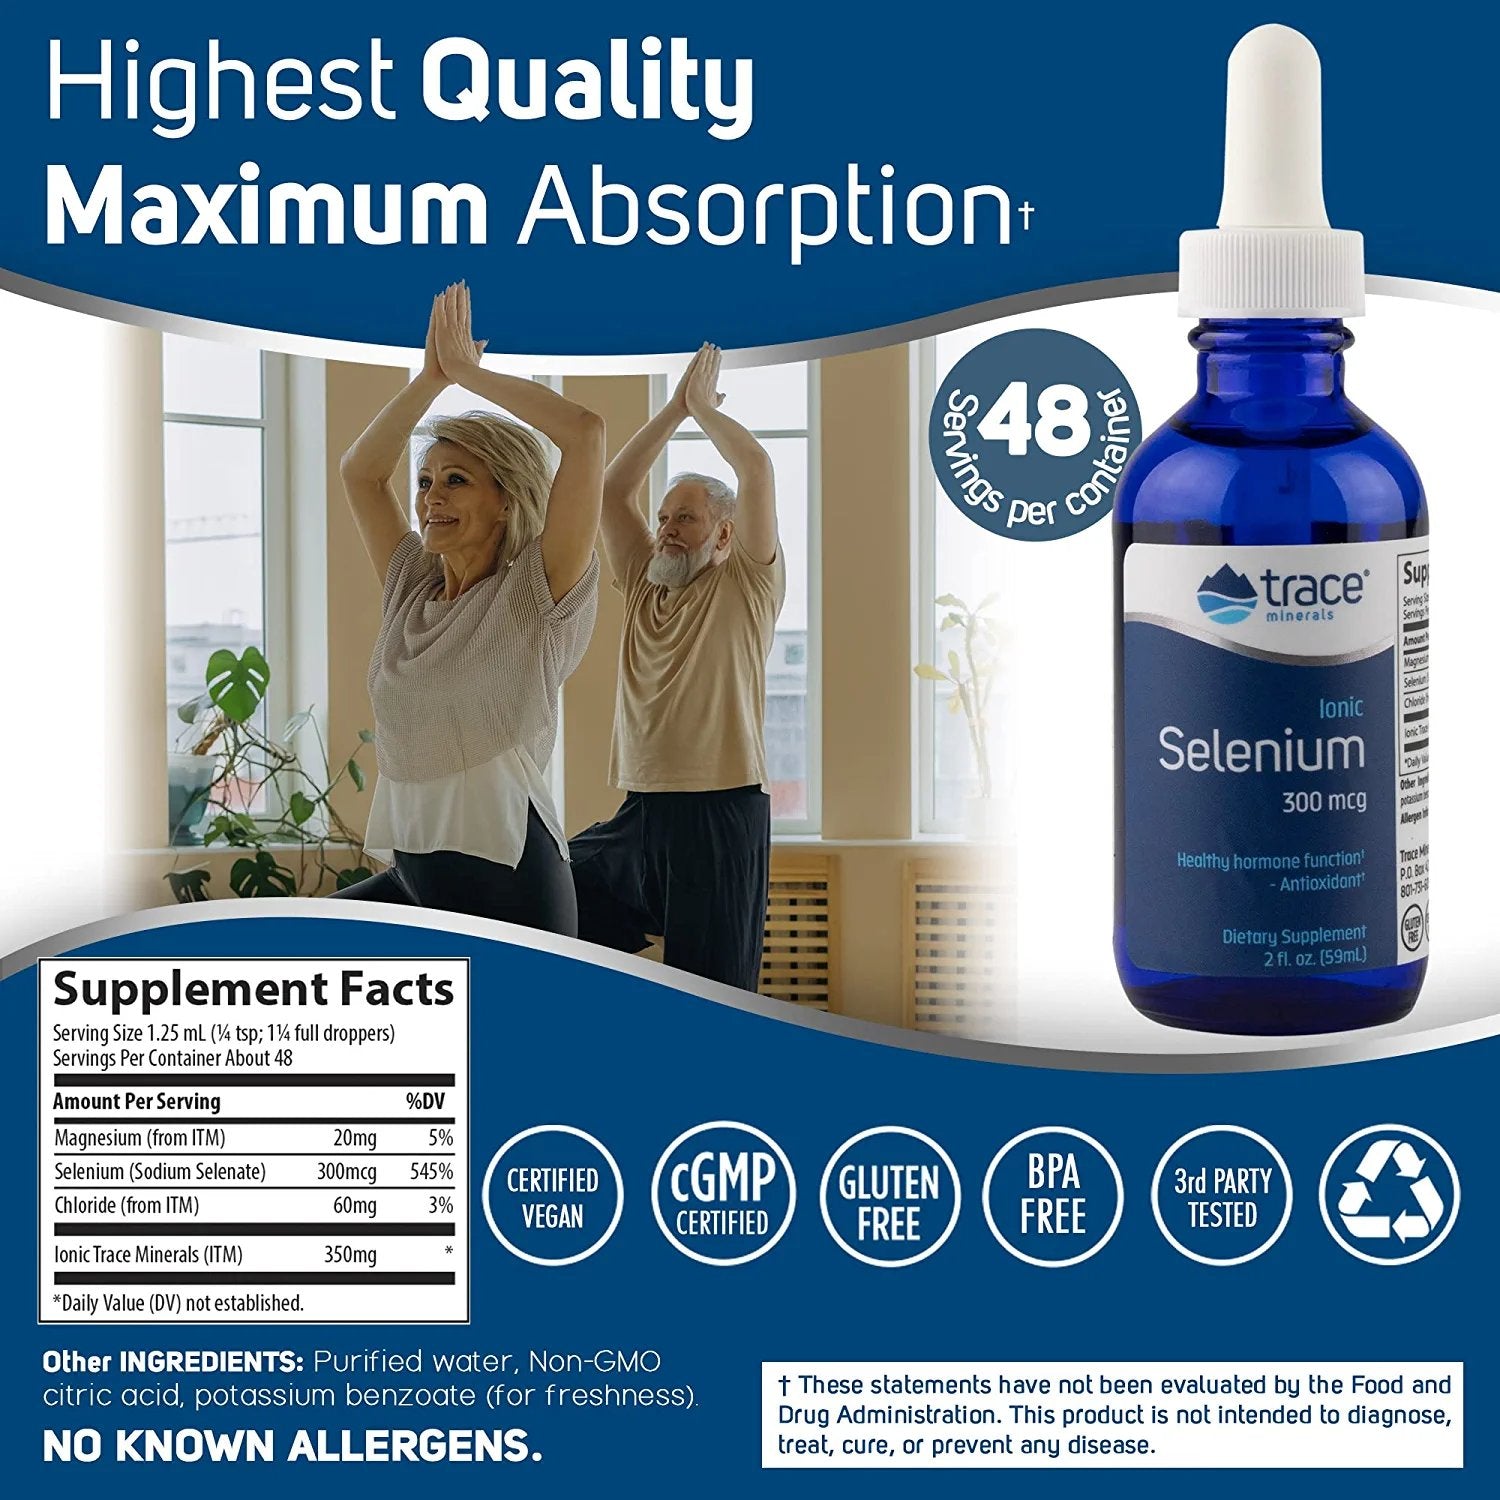 Trace Minerals Ionic Selenium 300 mcg | Cardiovascular Health + Hormone Function, Antioxidant | Supports Thyroid, Immune System, Ionic Trace Minerals | Yeast-Free |2 Fl Oz (Pack of 2)